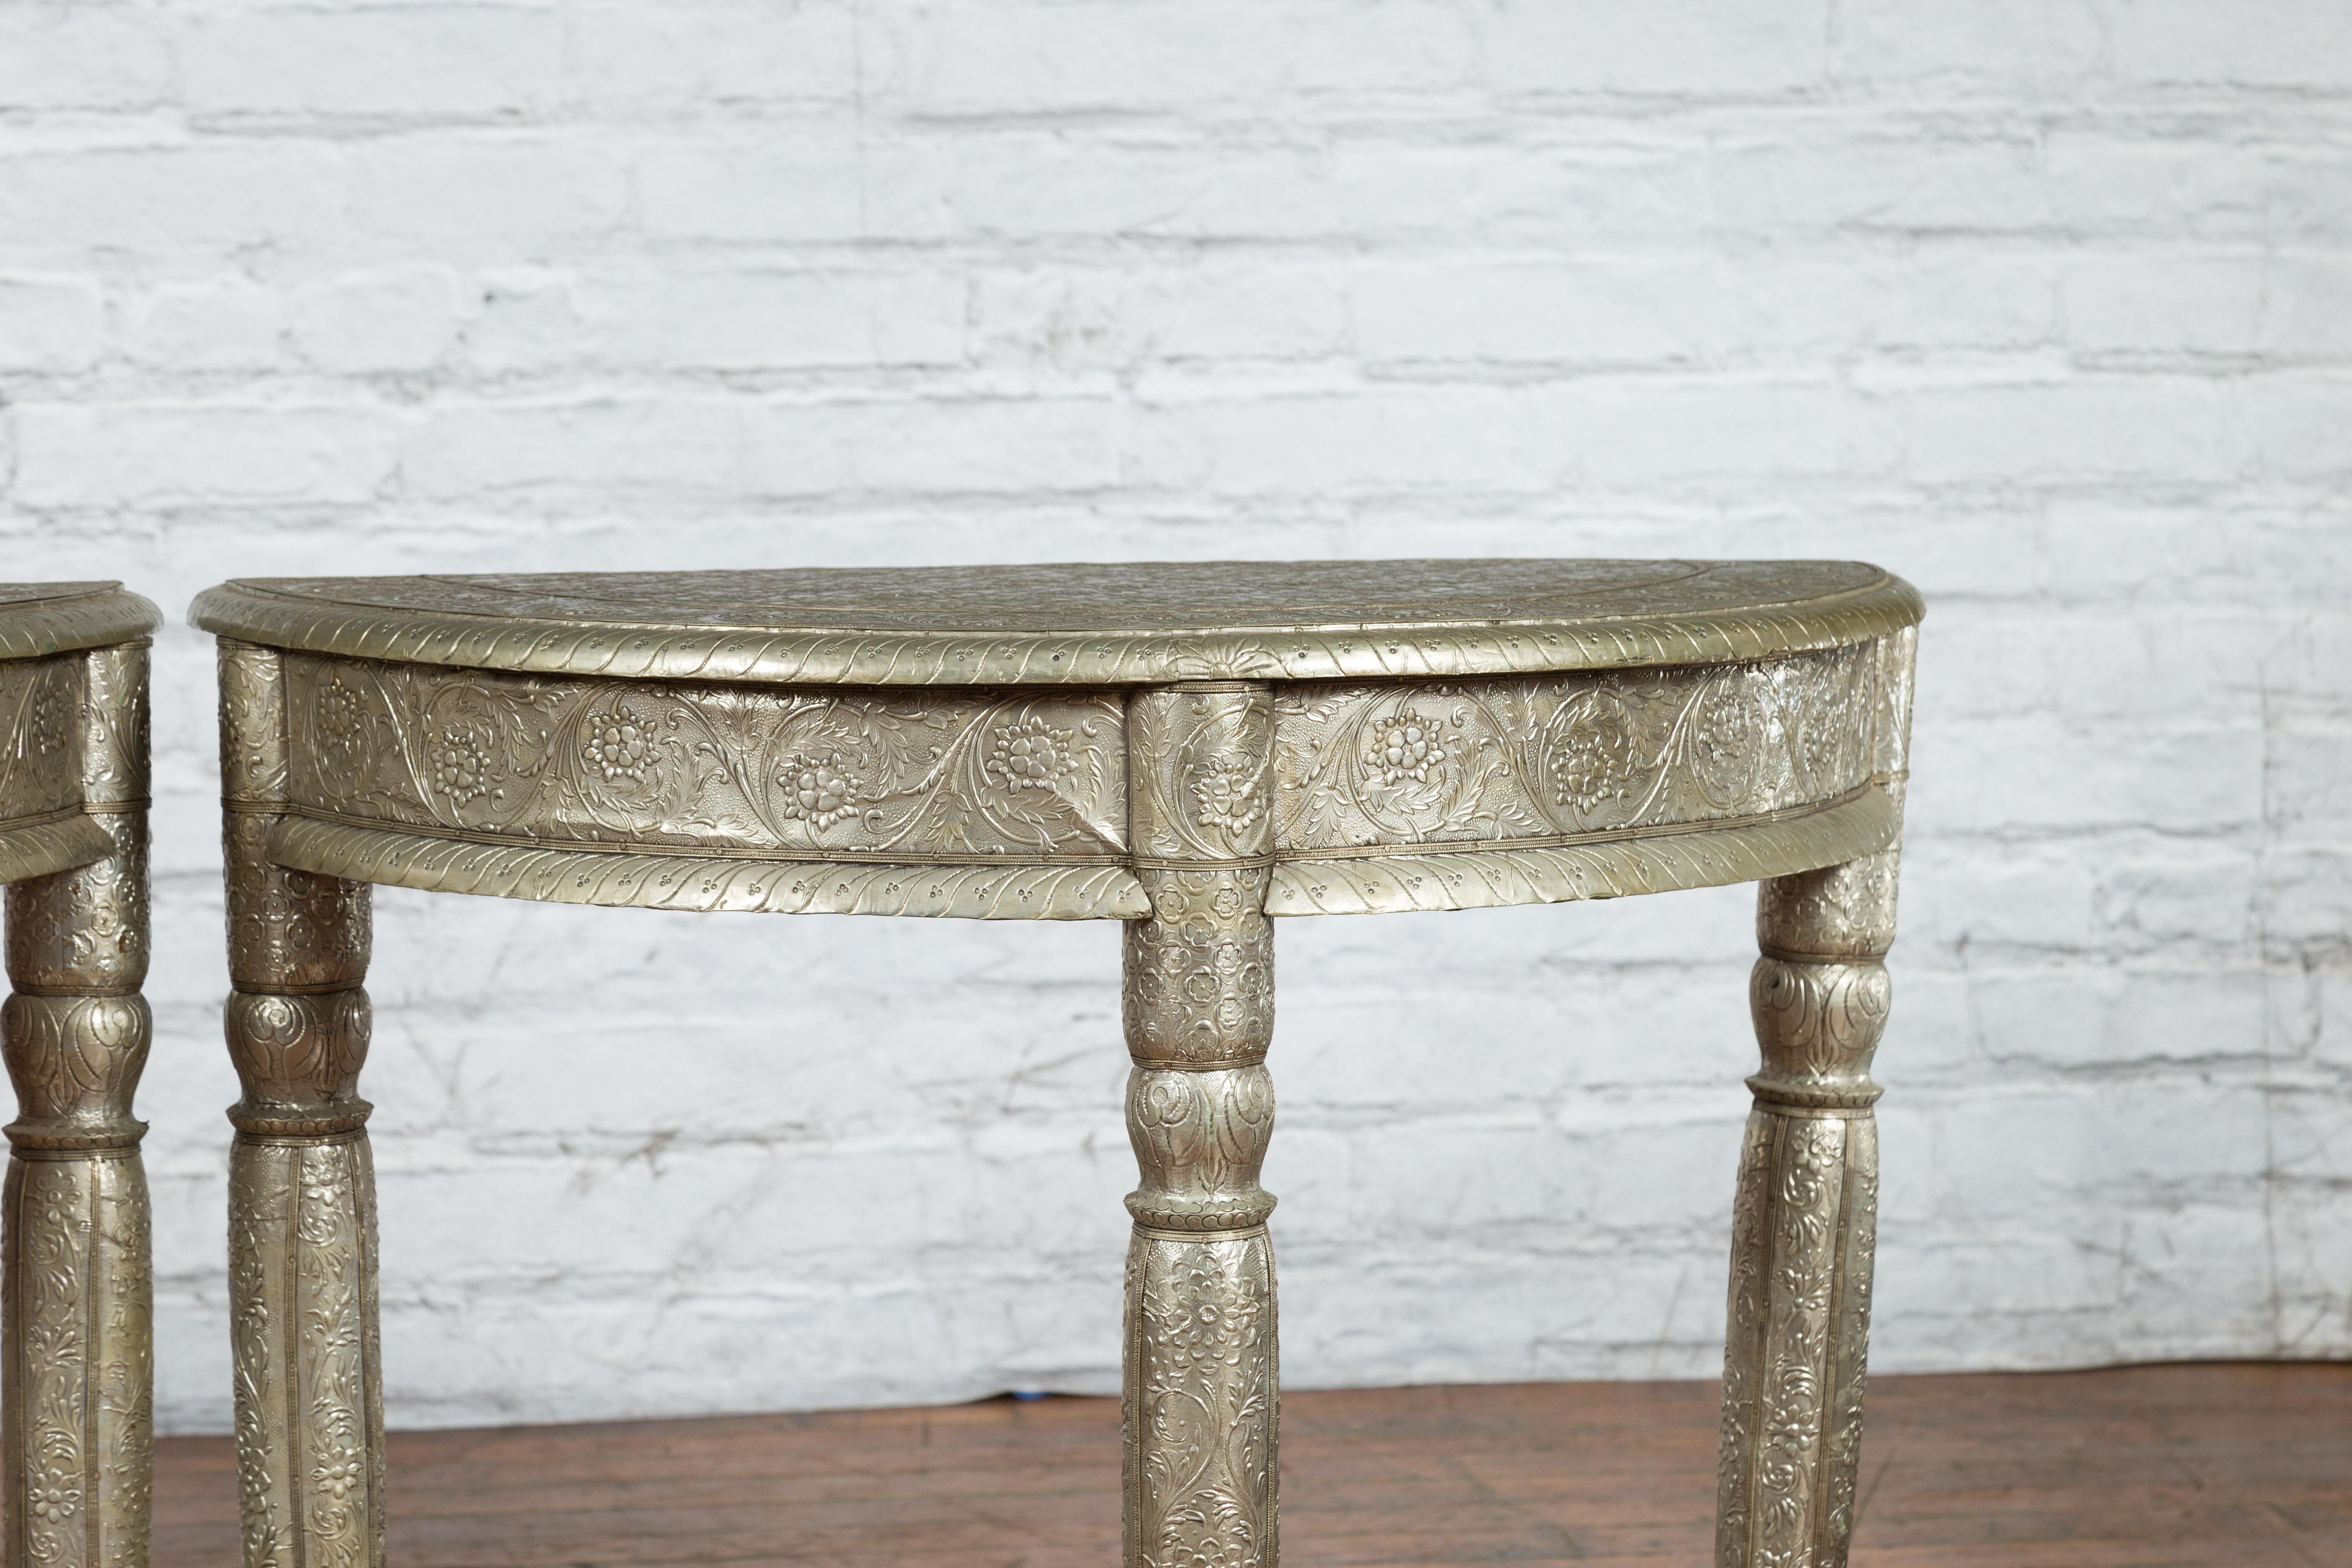 Pair of Indian Metal Sheathing Repoussé Demilune Tables with Floral Arabesques In Good Condition For Sale In Yonkers, NY